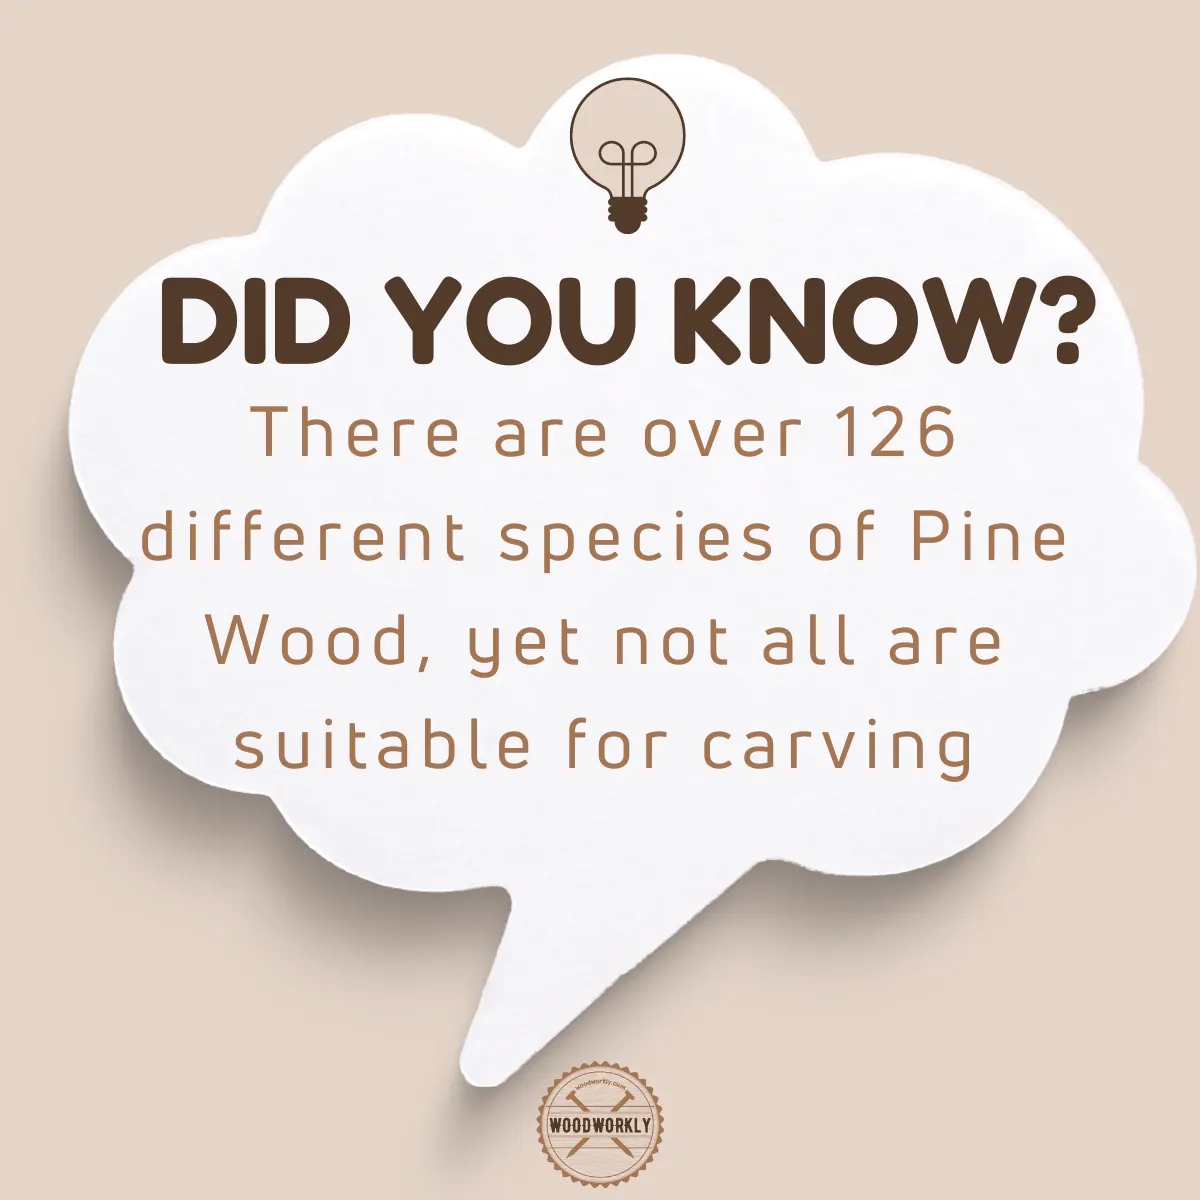 Did you know fact about carving Pine wood